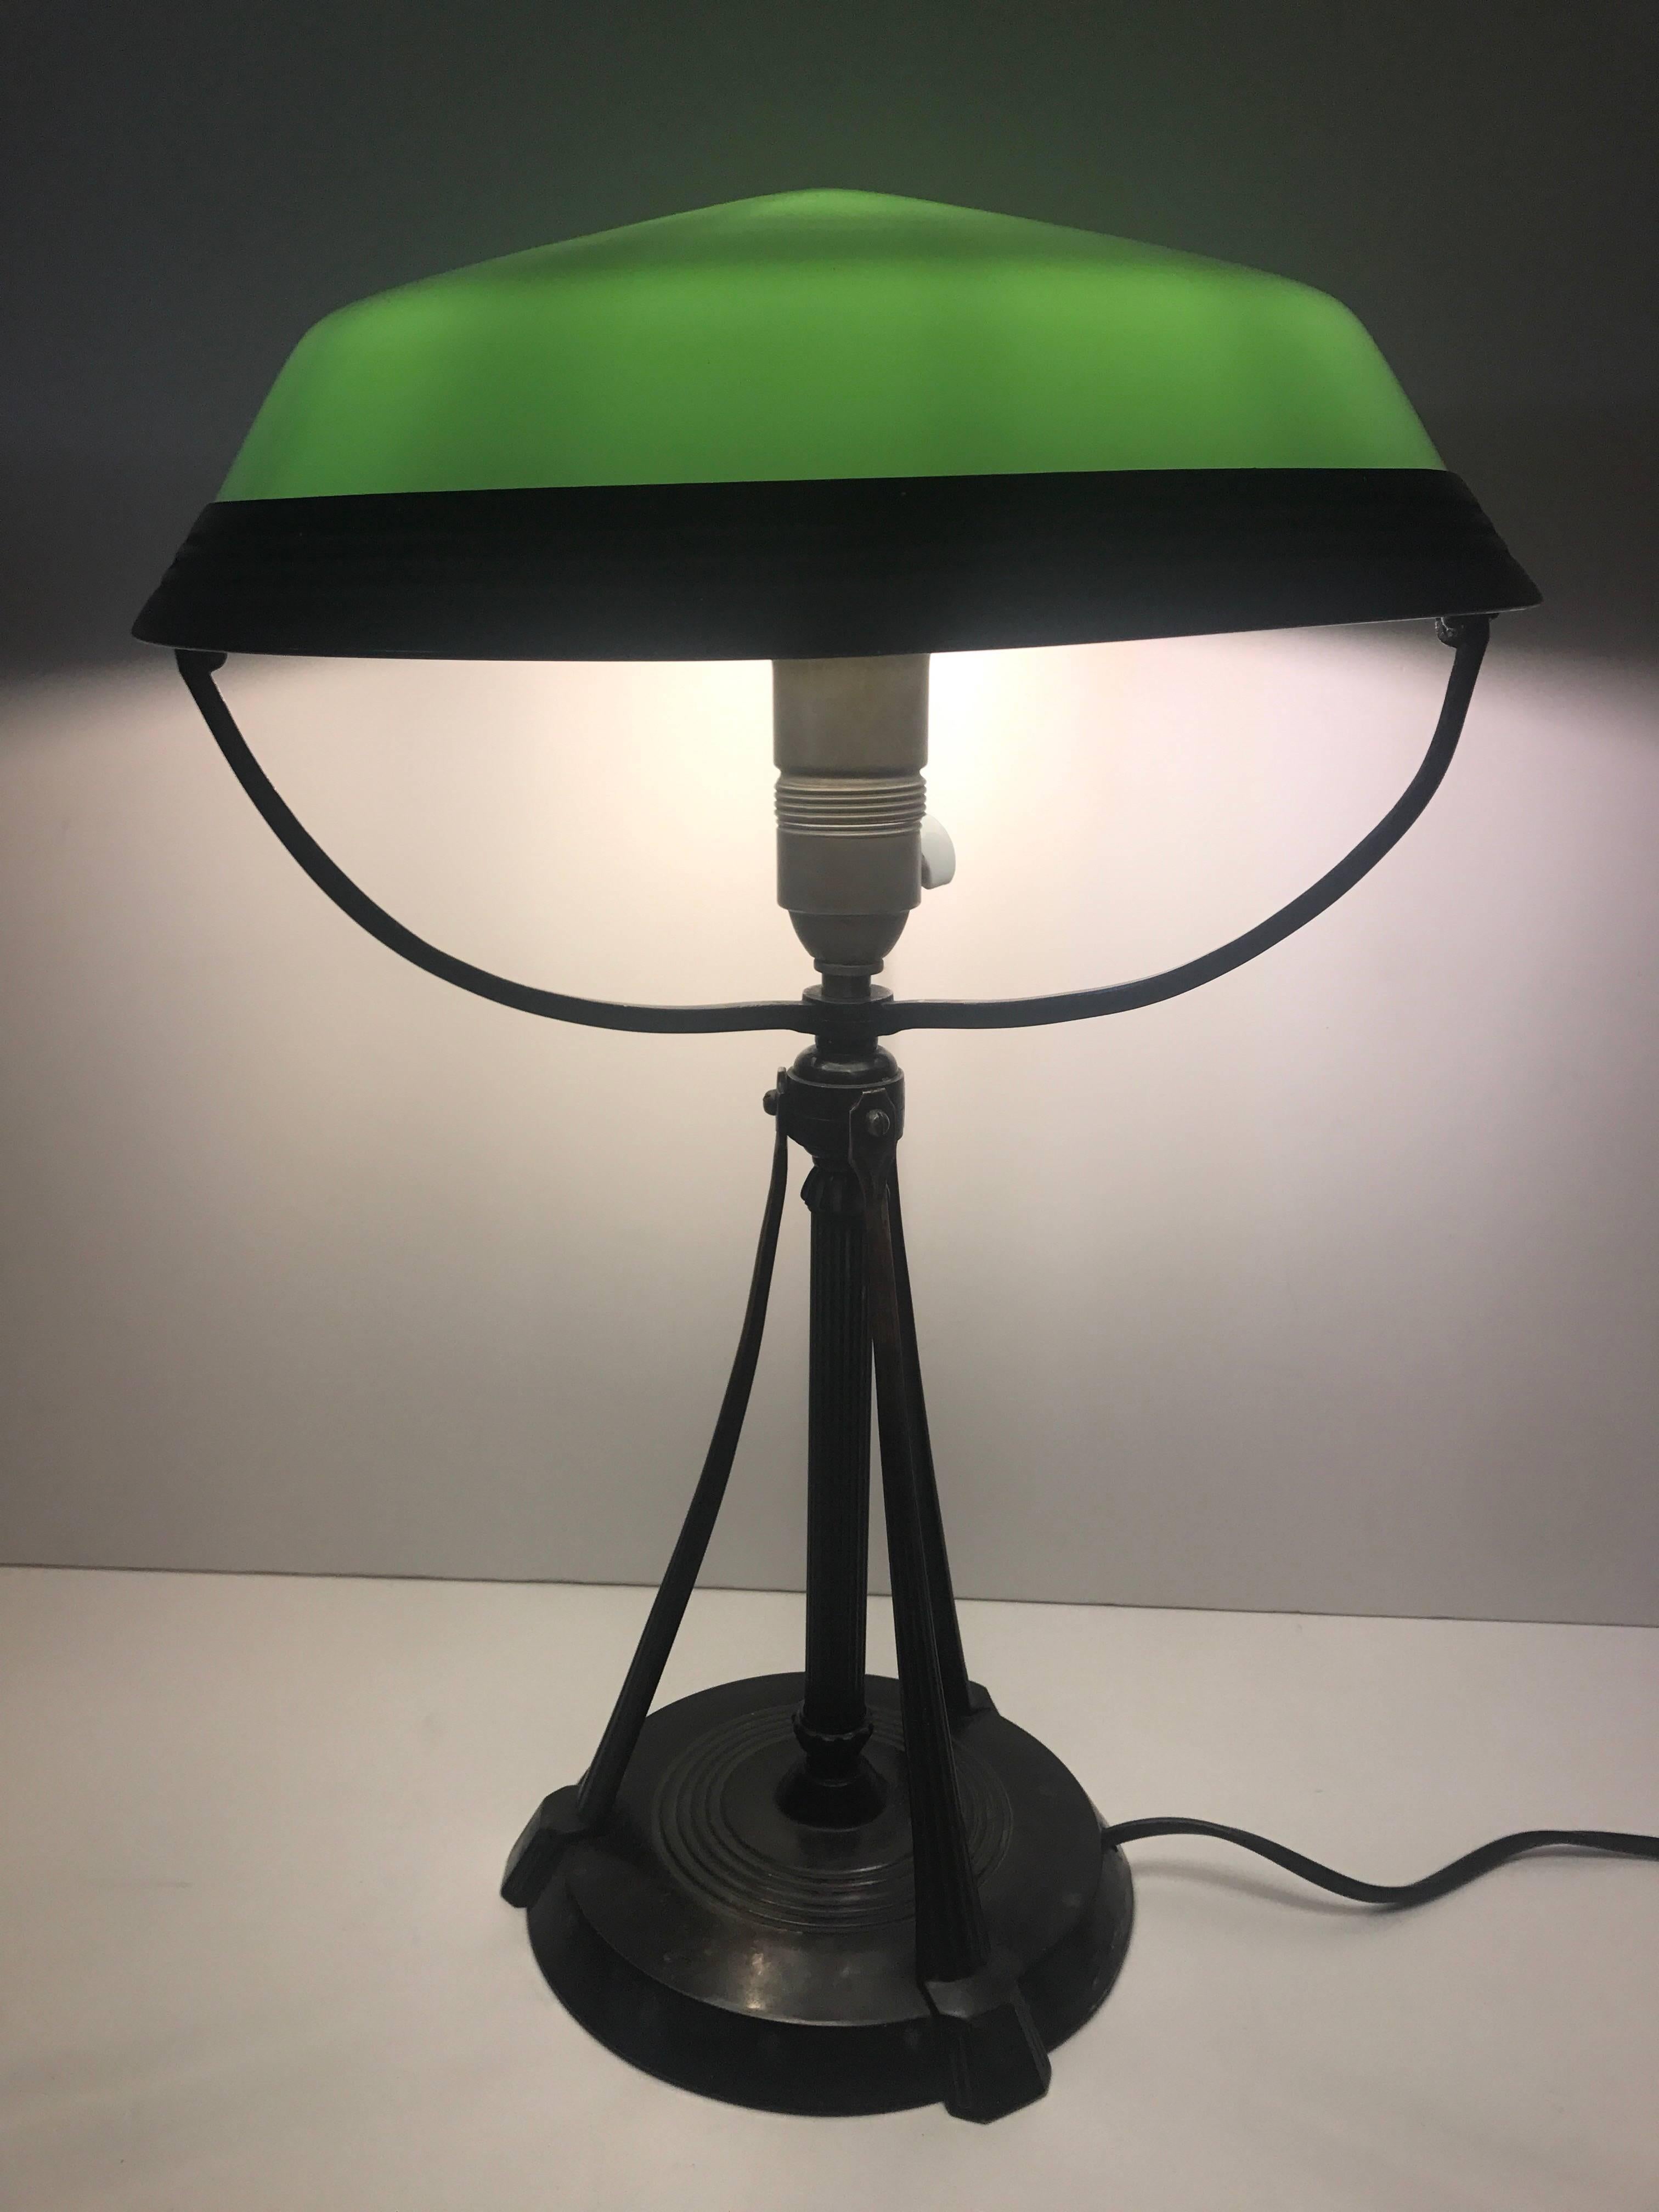 Swedish Art Deco Table Lamp Glass and Bronzepatinated Metal.
A very beautiful and large table lamp, most likely Swedish made of blown glass and speller that has been patinated to look like bronze. The lamp is in a very nice condition and all the